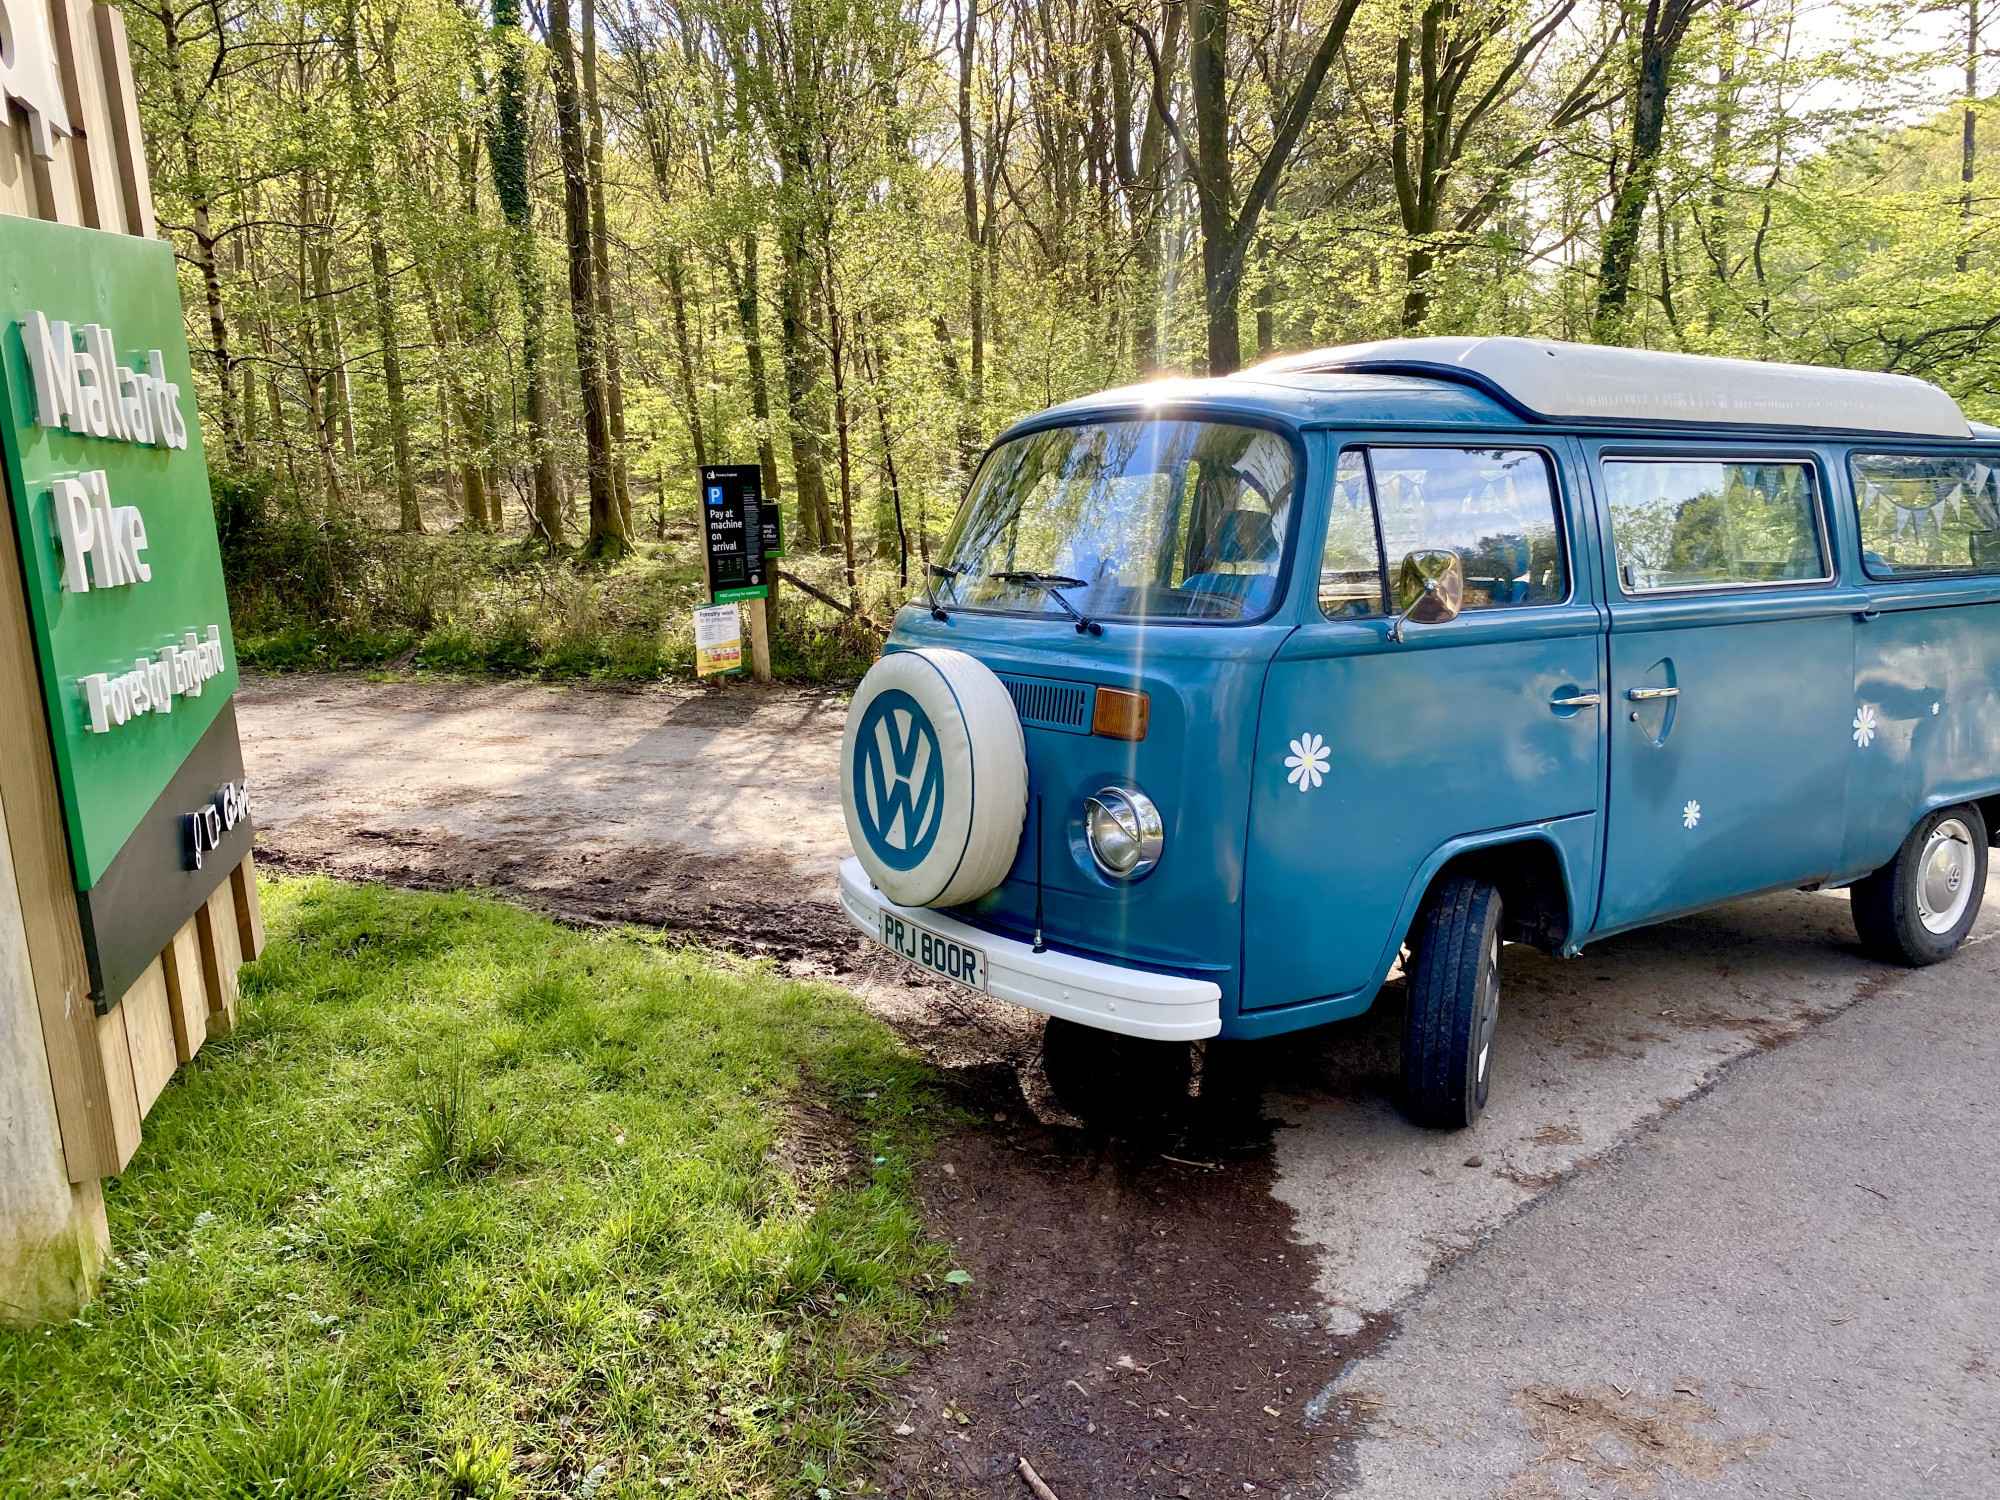 A  Campervan called Rufus- and  for hire in Cinderford, Gloucestershire